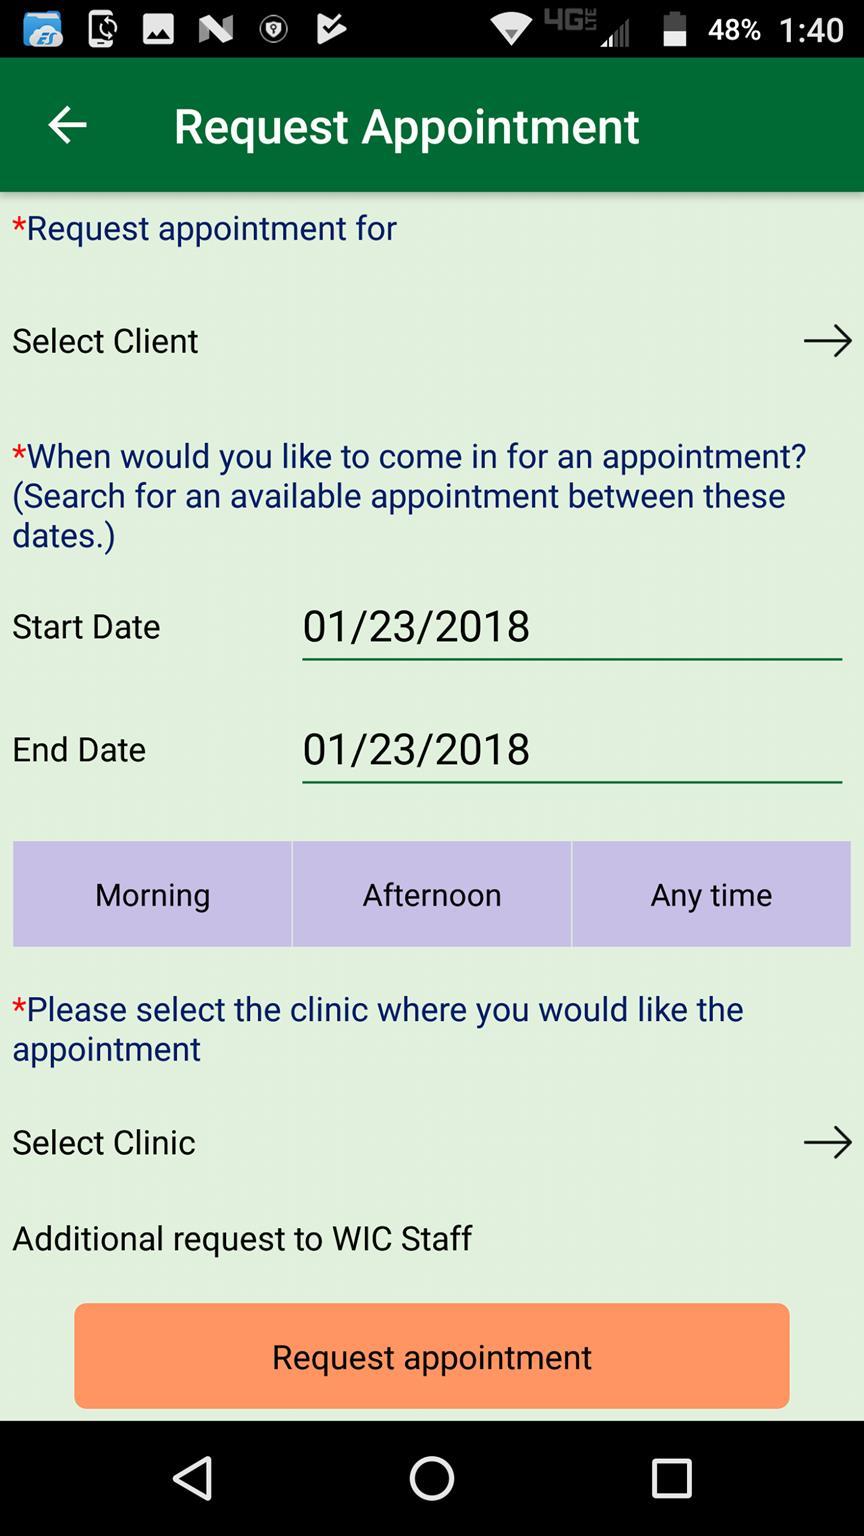 Appointments Request for an Appointment from this screen :